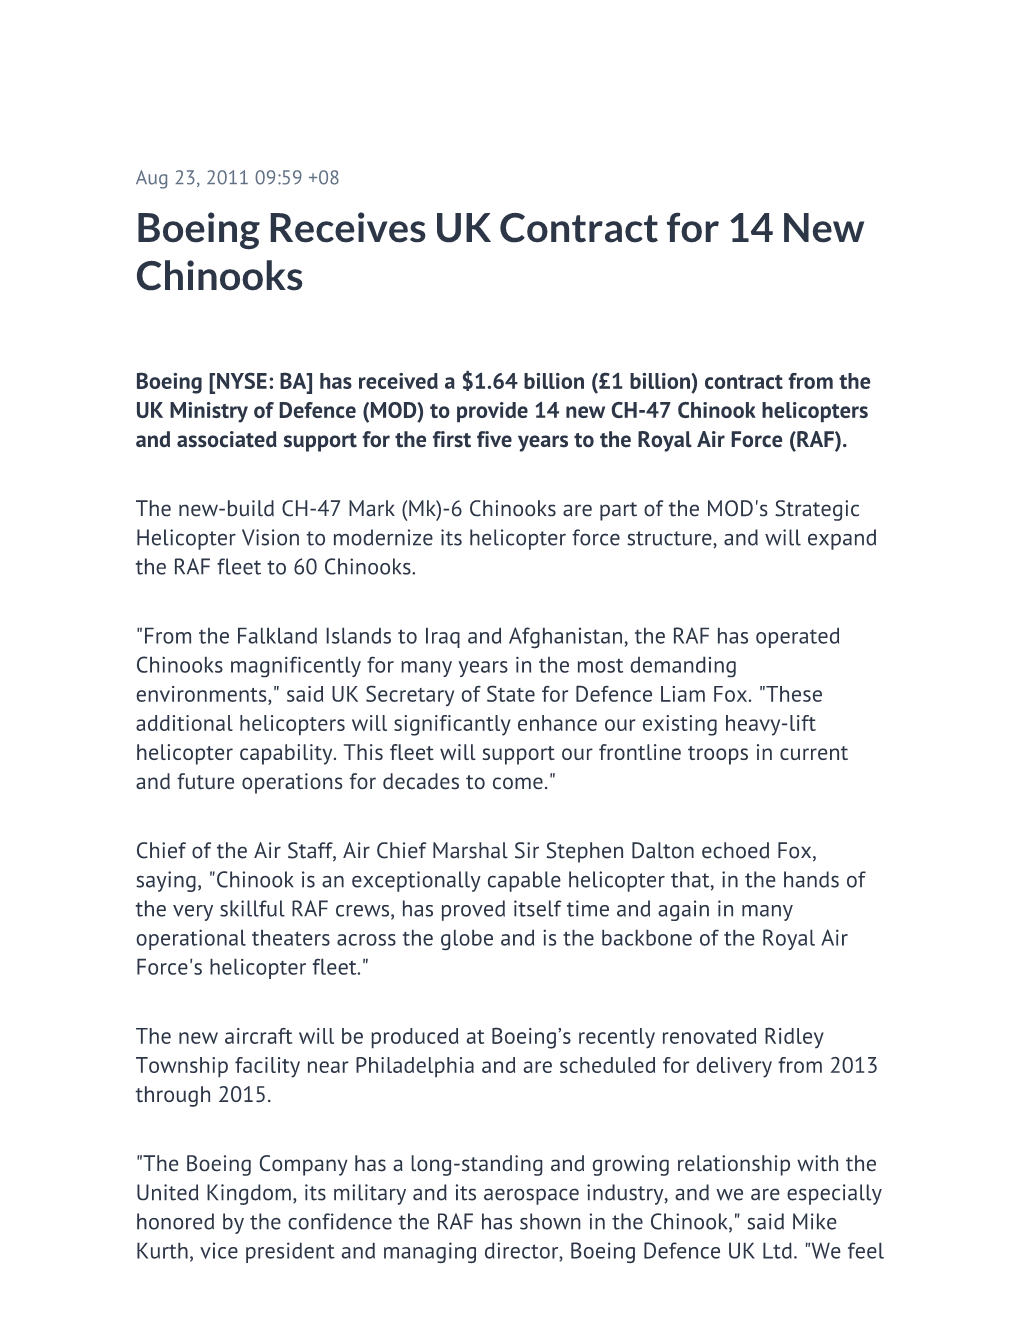 Boeing Receives UK Contract for 14 New Chinooks